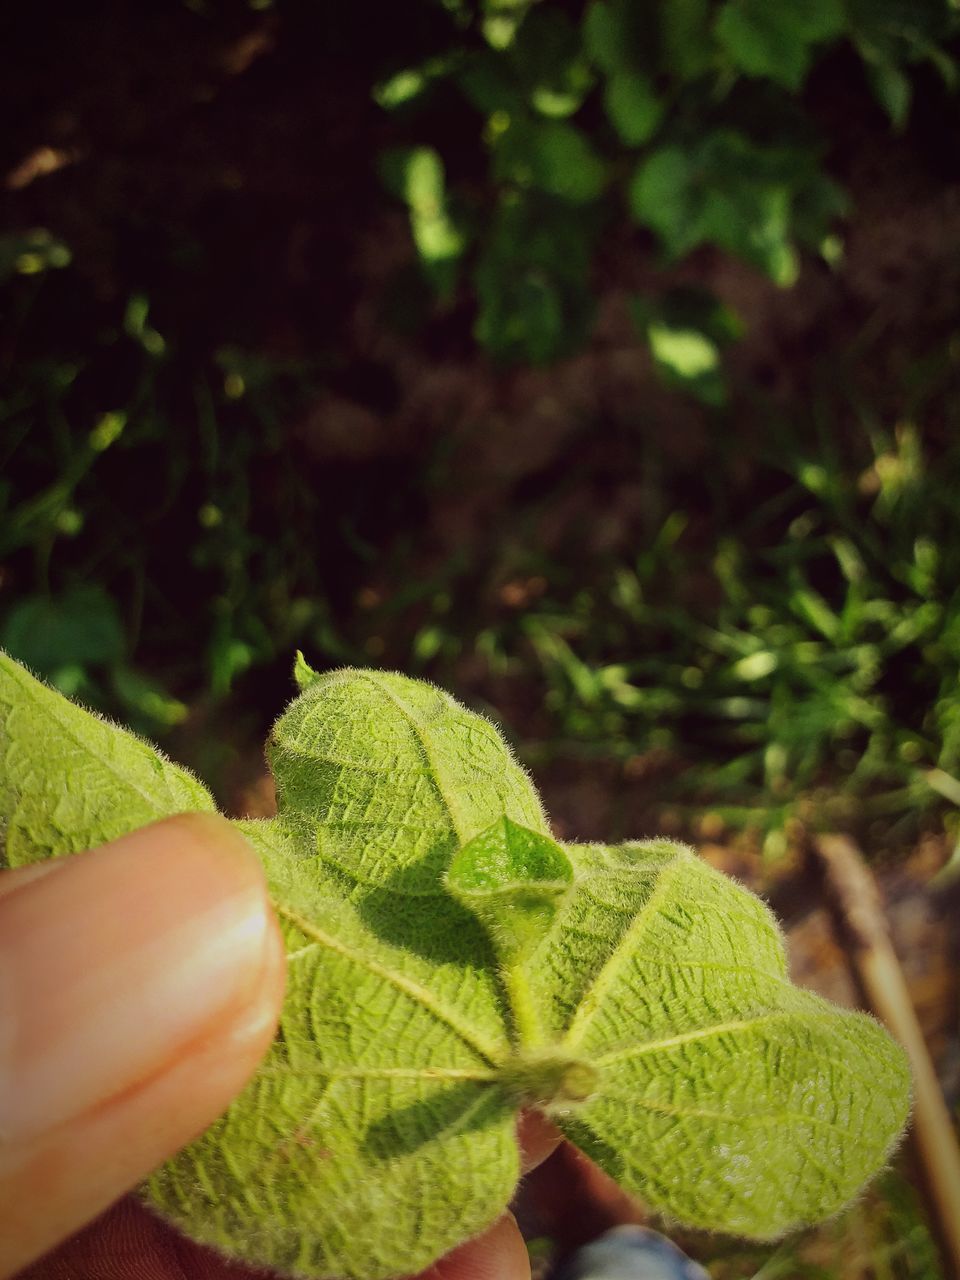 CLOSE-UP OF HAND HOLDING GREEN LEAVES